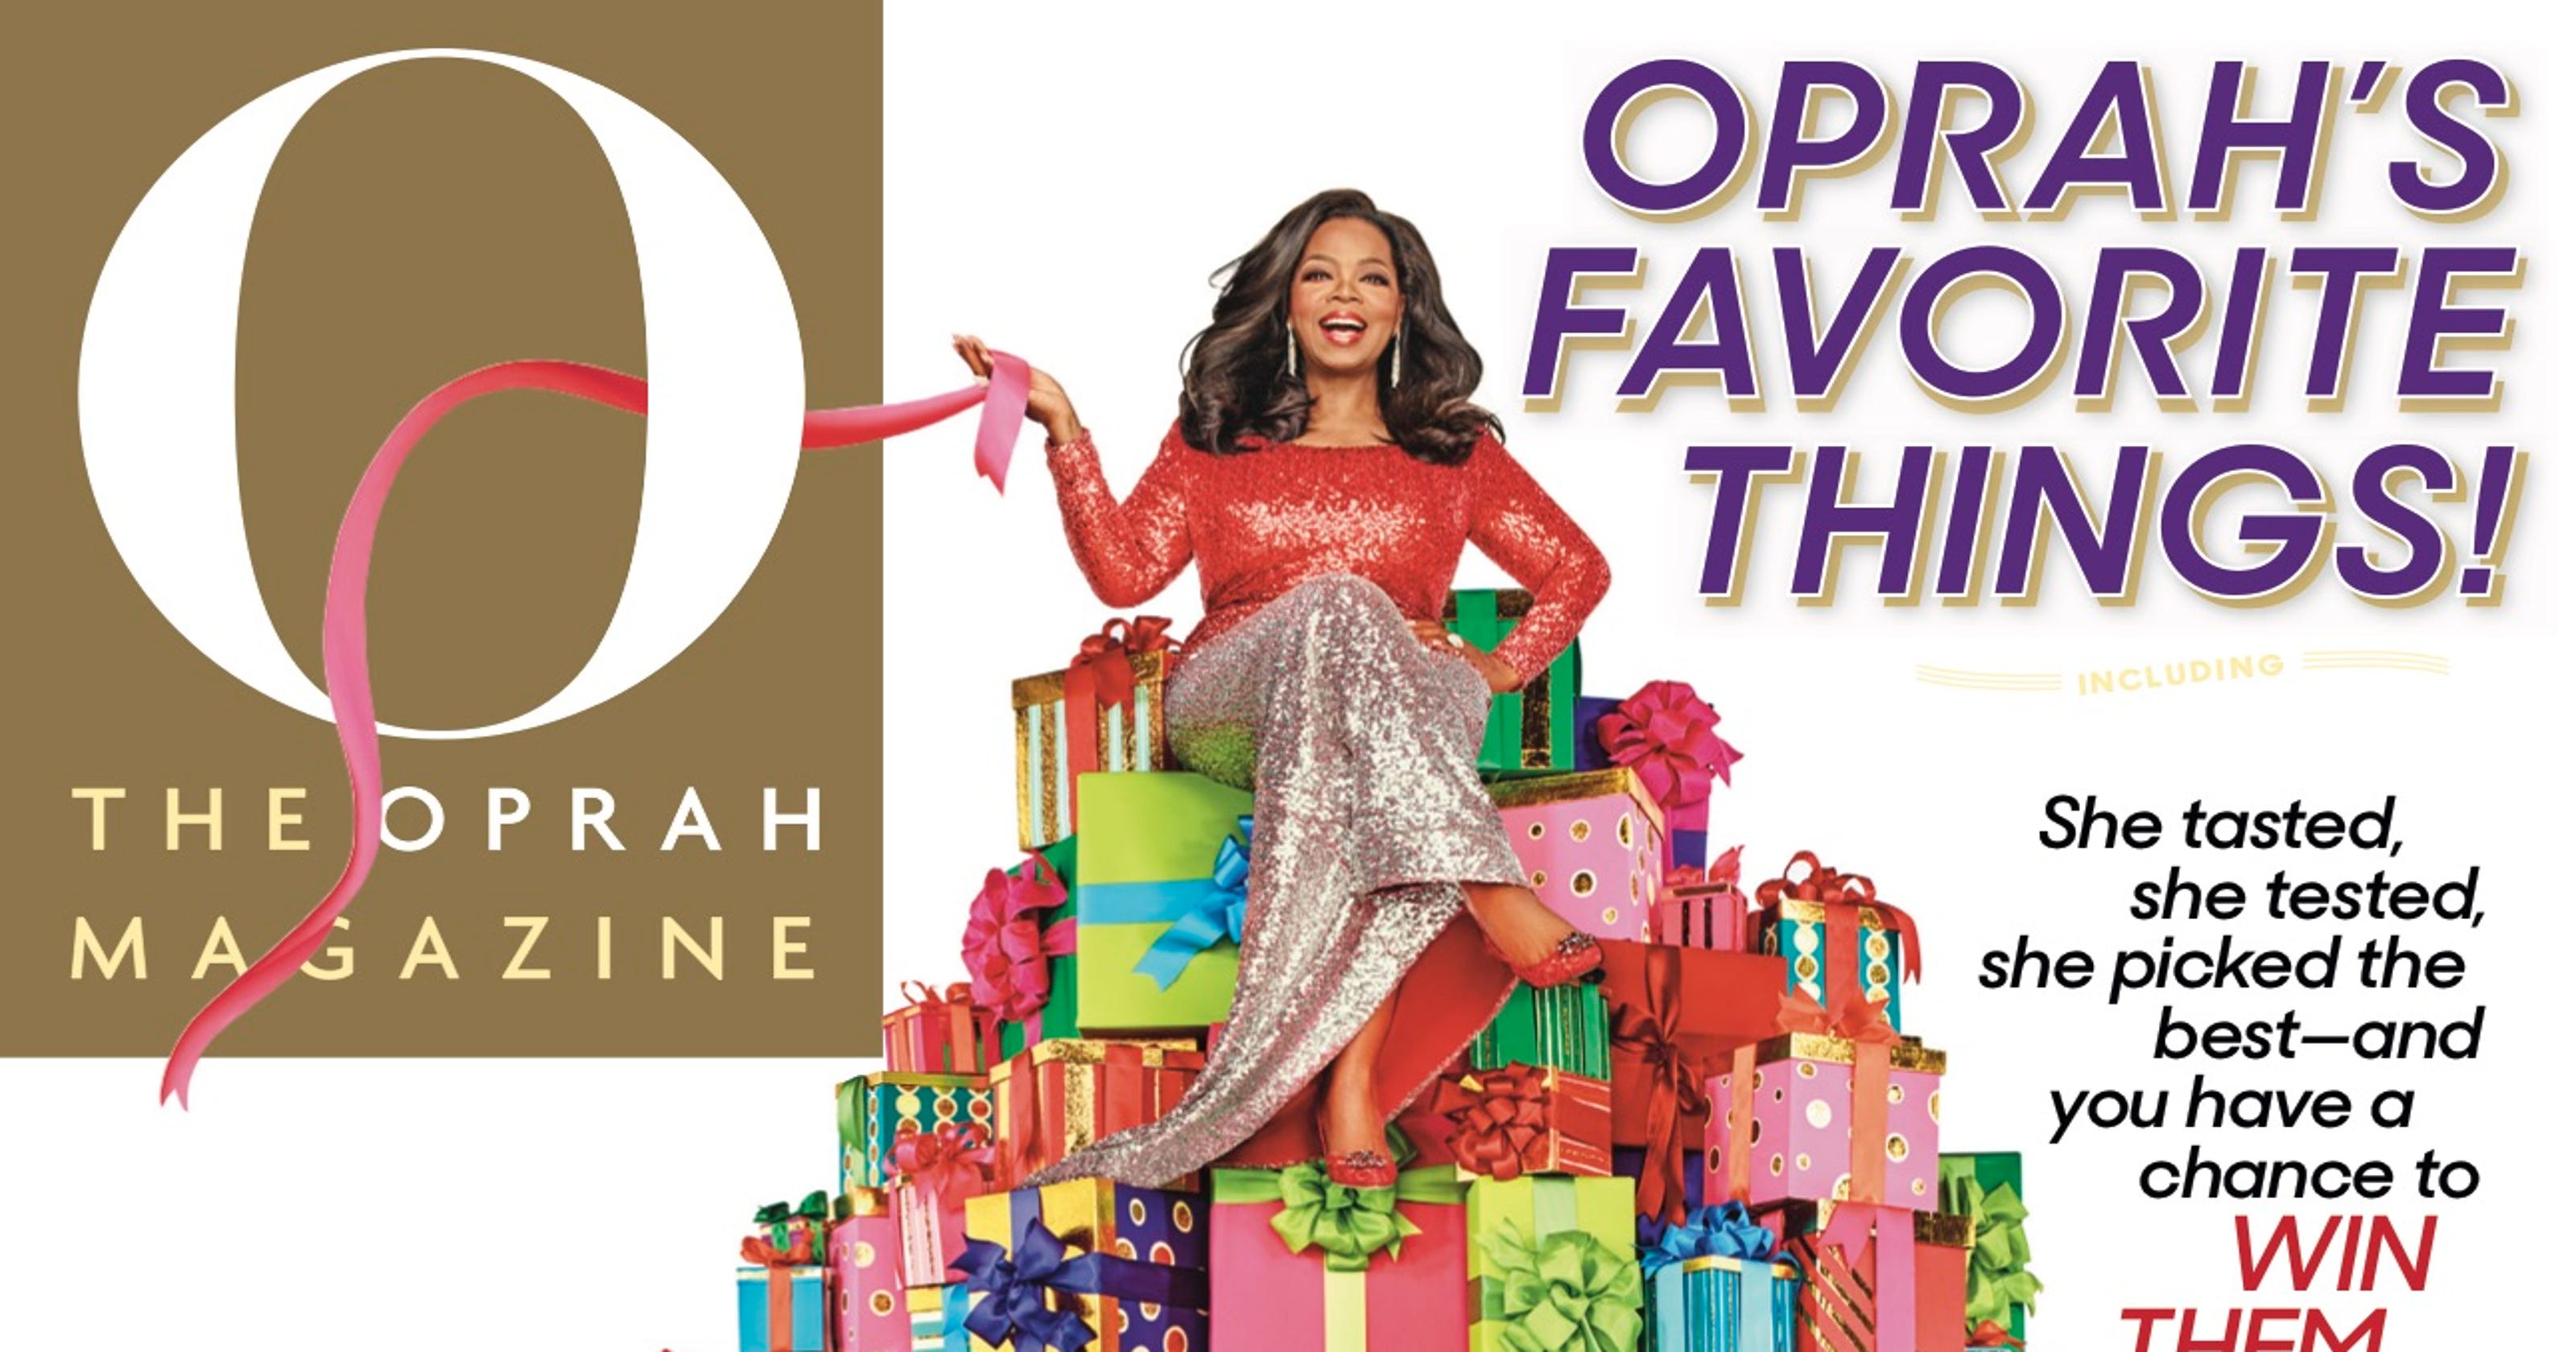 Oprah Winfrey's favorite things list is here with some budget options